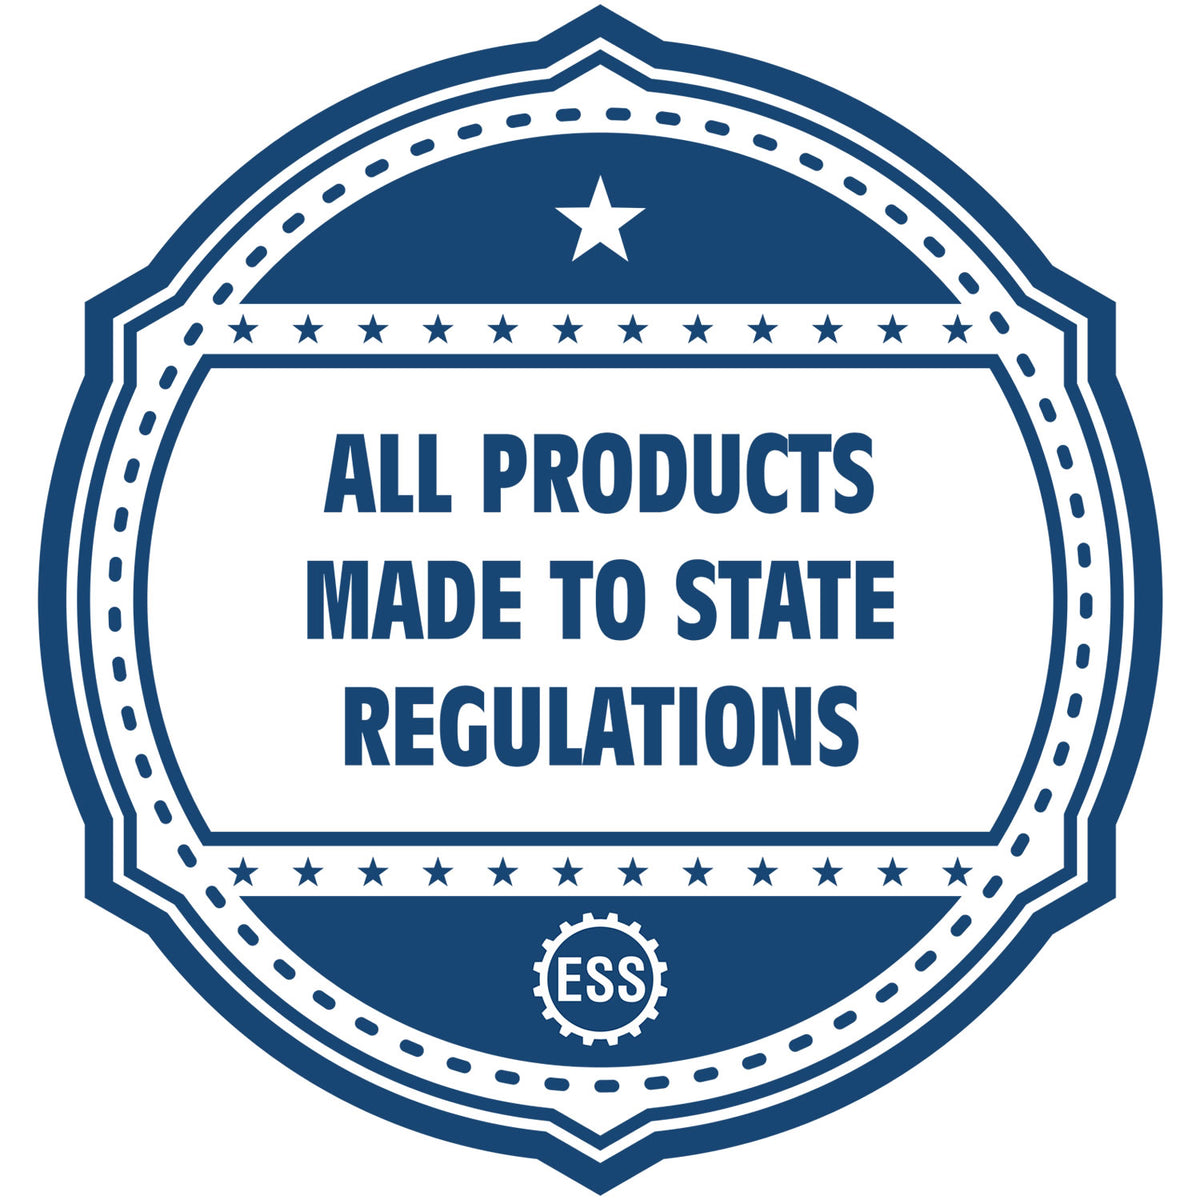 An icon or badge element for the Premium MaxLight Pre-Inked Kansas Landscape Architectural Stamp showing that this product is made in compliance with state regulations.